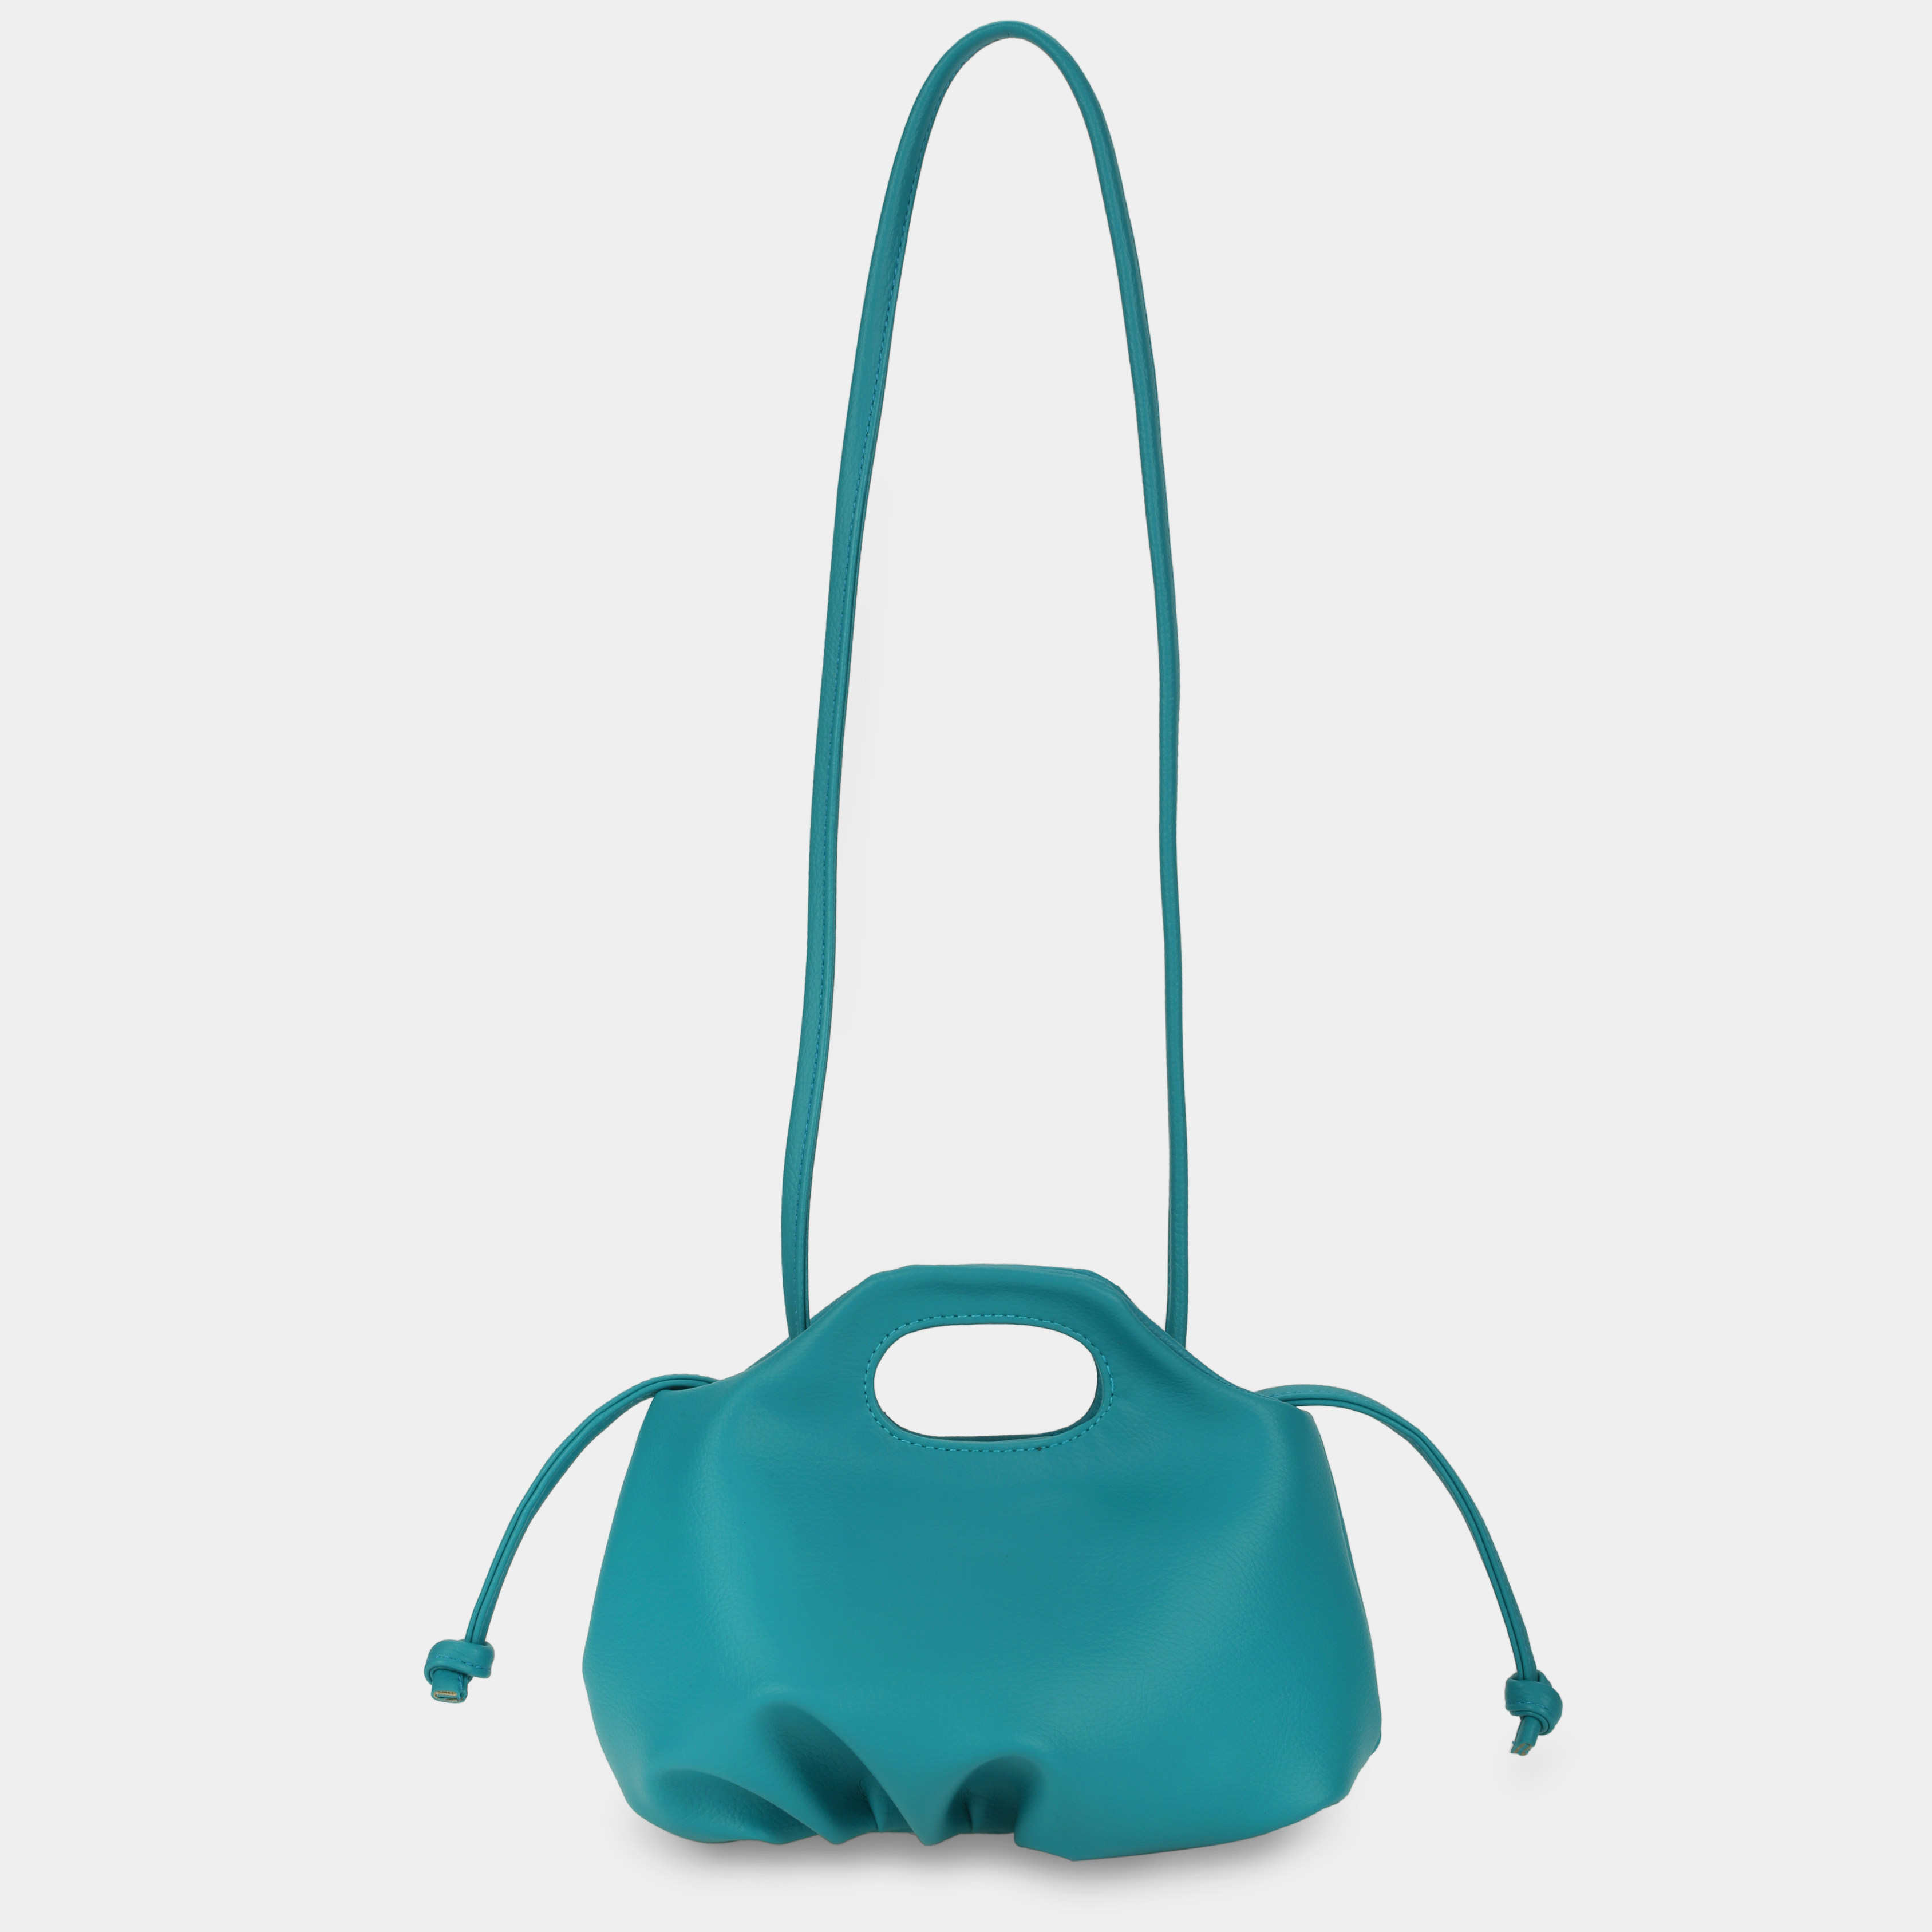 Flower Mini bag in turquoise color